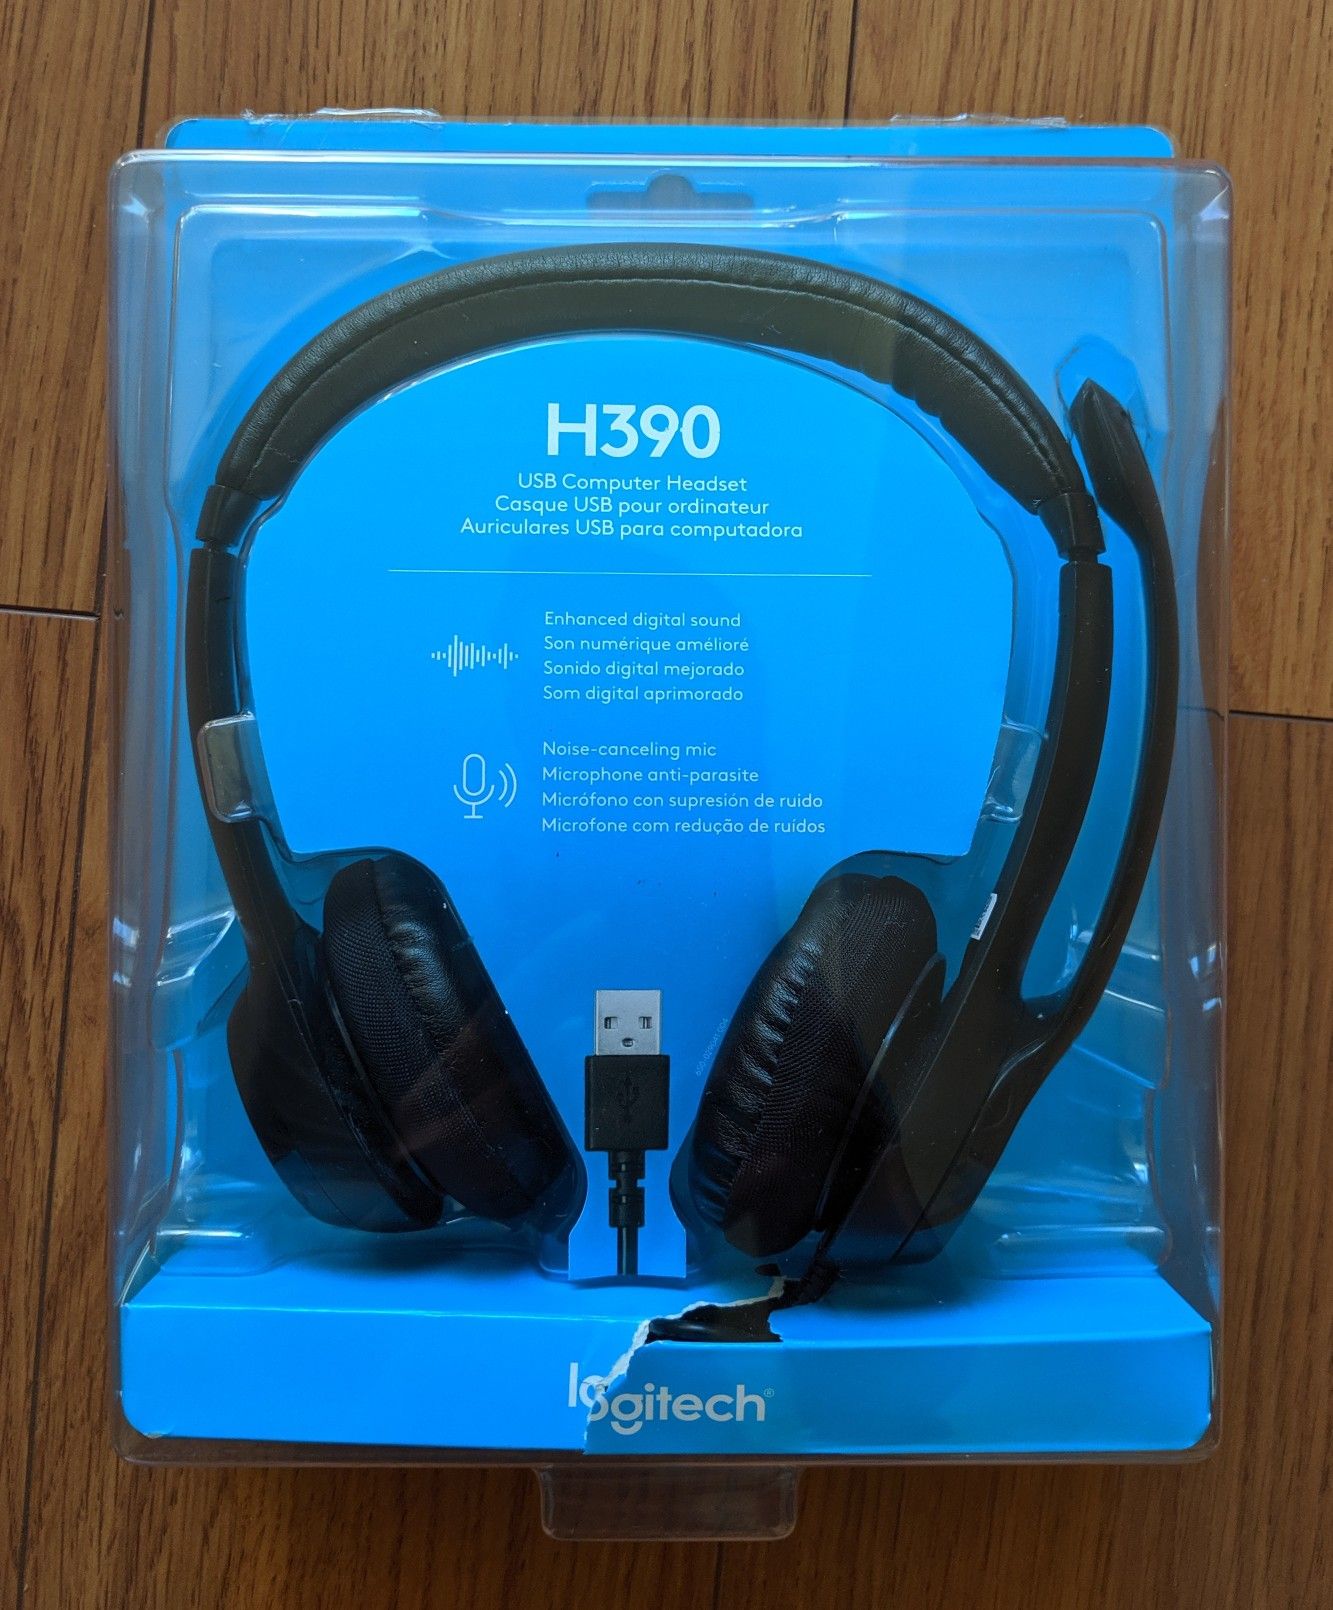 Logitech USB Headset H390 with Noise Cancelling Headset